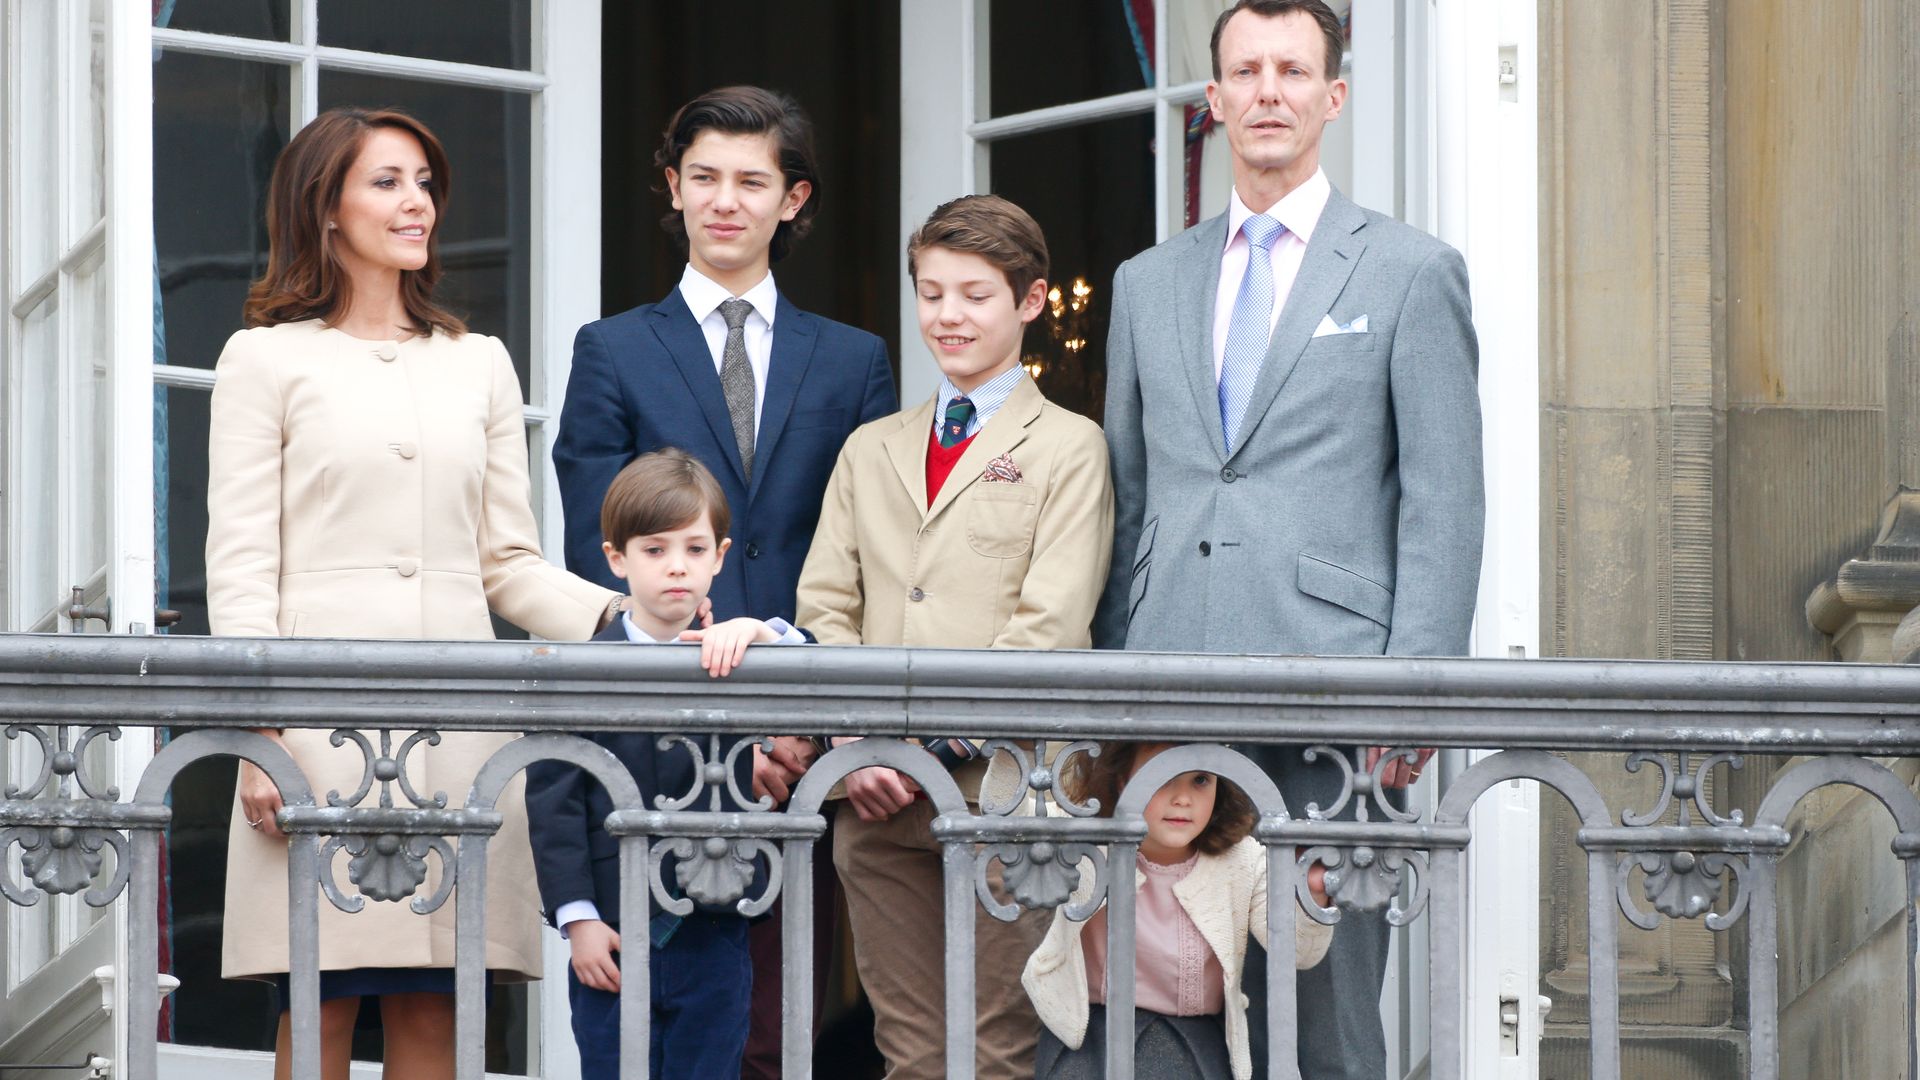 Prince Joachim to attend brother Prince Frederik's accession without wife or children who were stripped of titles